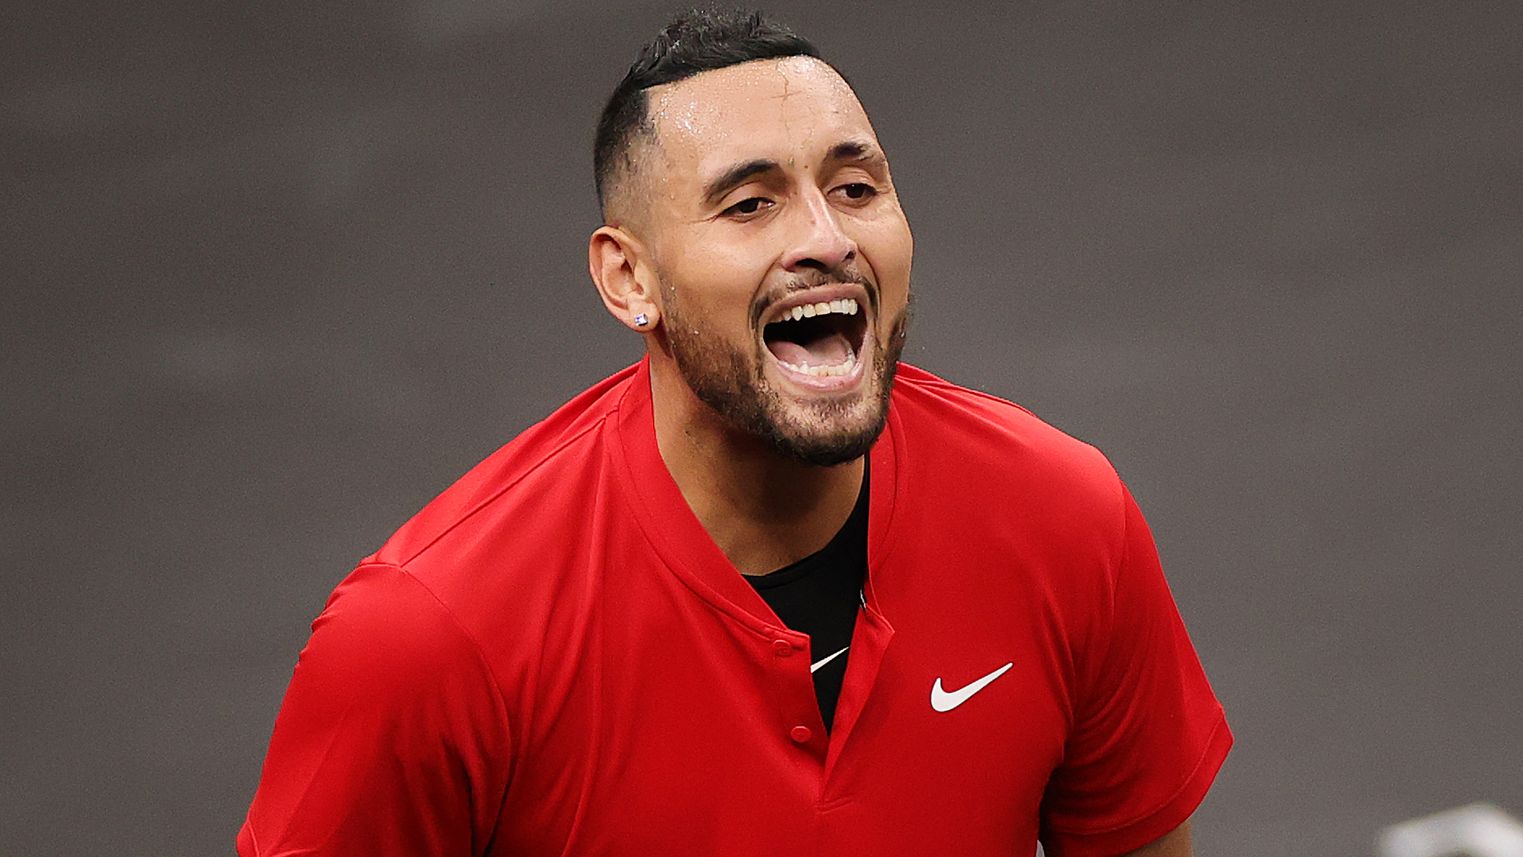 Nick Kyrgios of Team World reacts to a shot against Stefanos Tsitsipas of Team Europe during the fifth match during Day 2 of the 2021 Laver Cup at TD Garden.